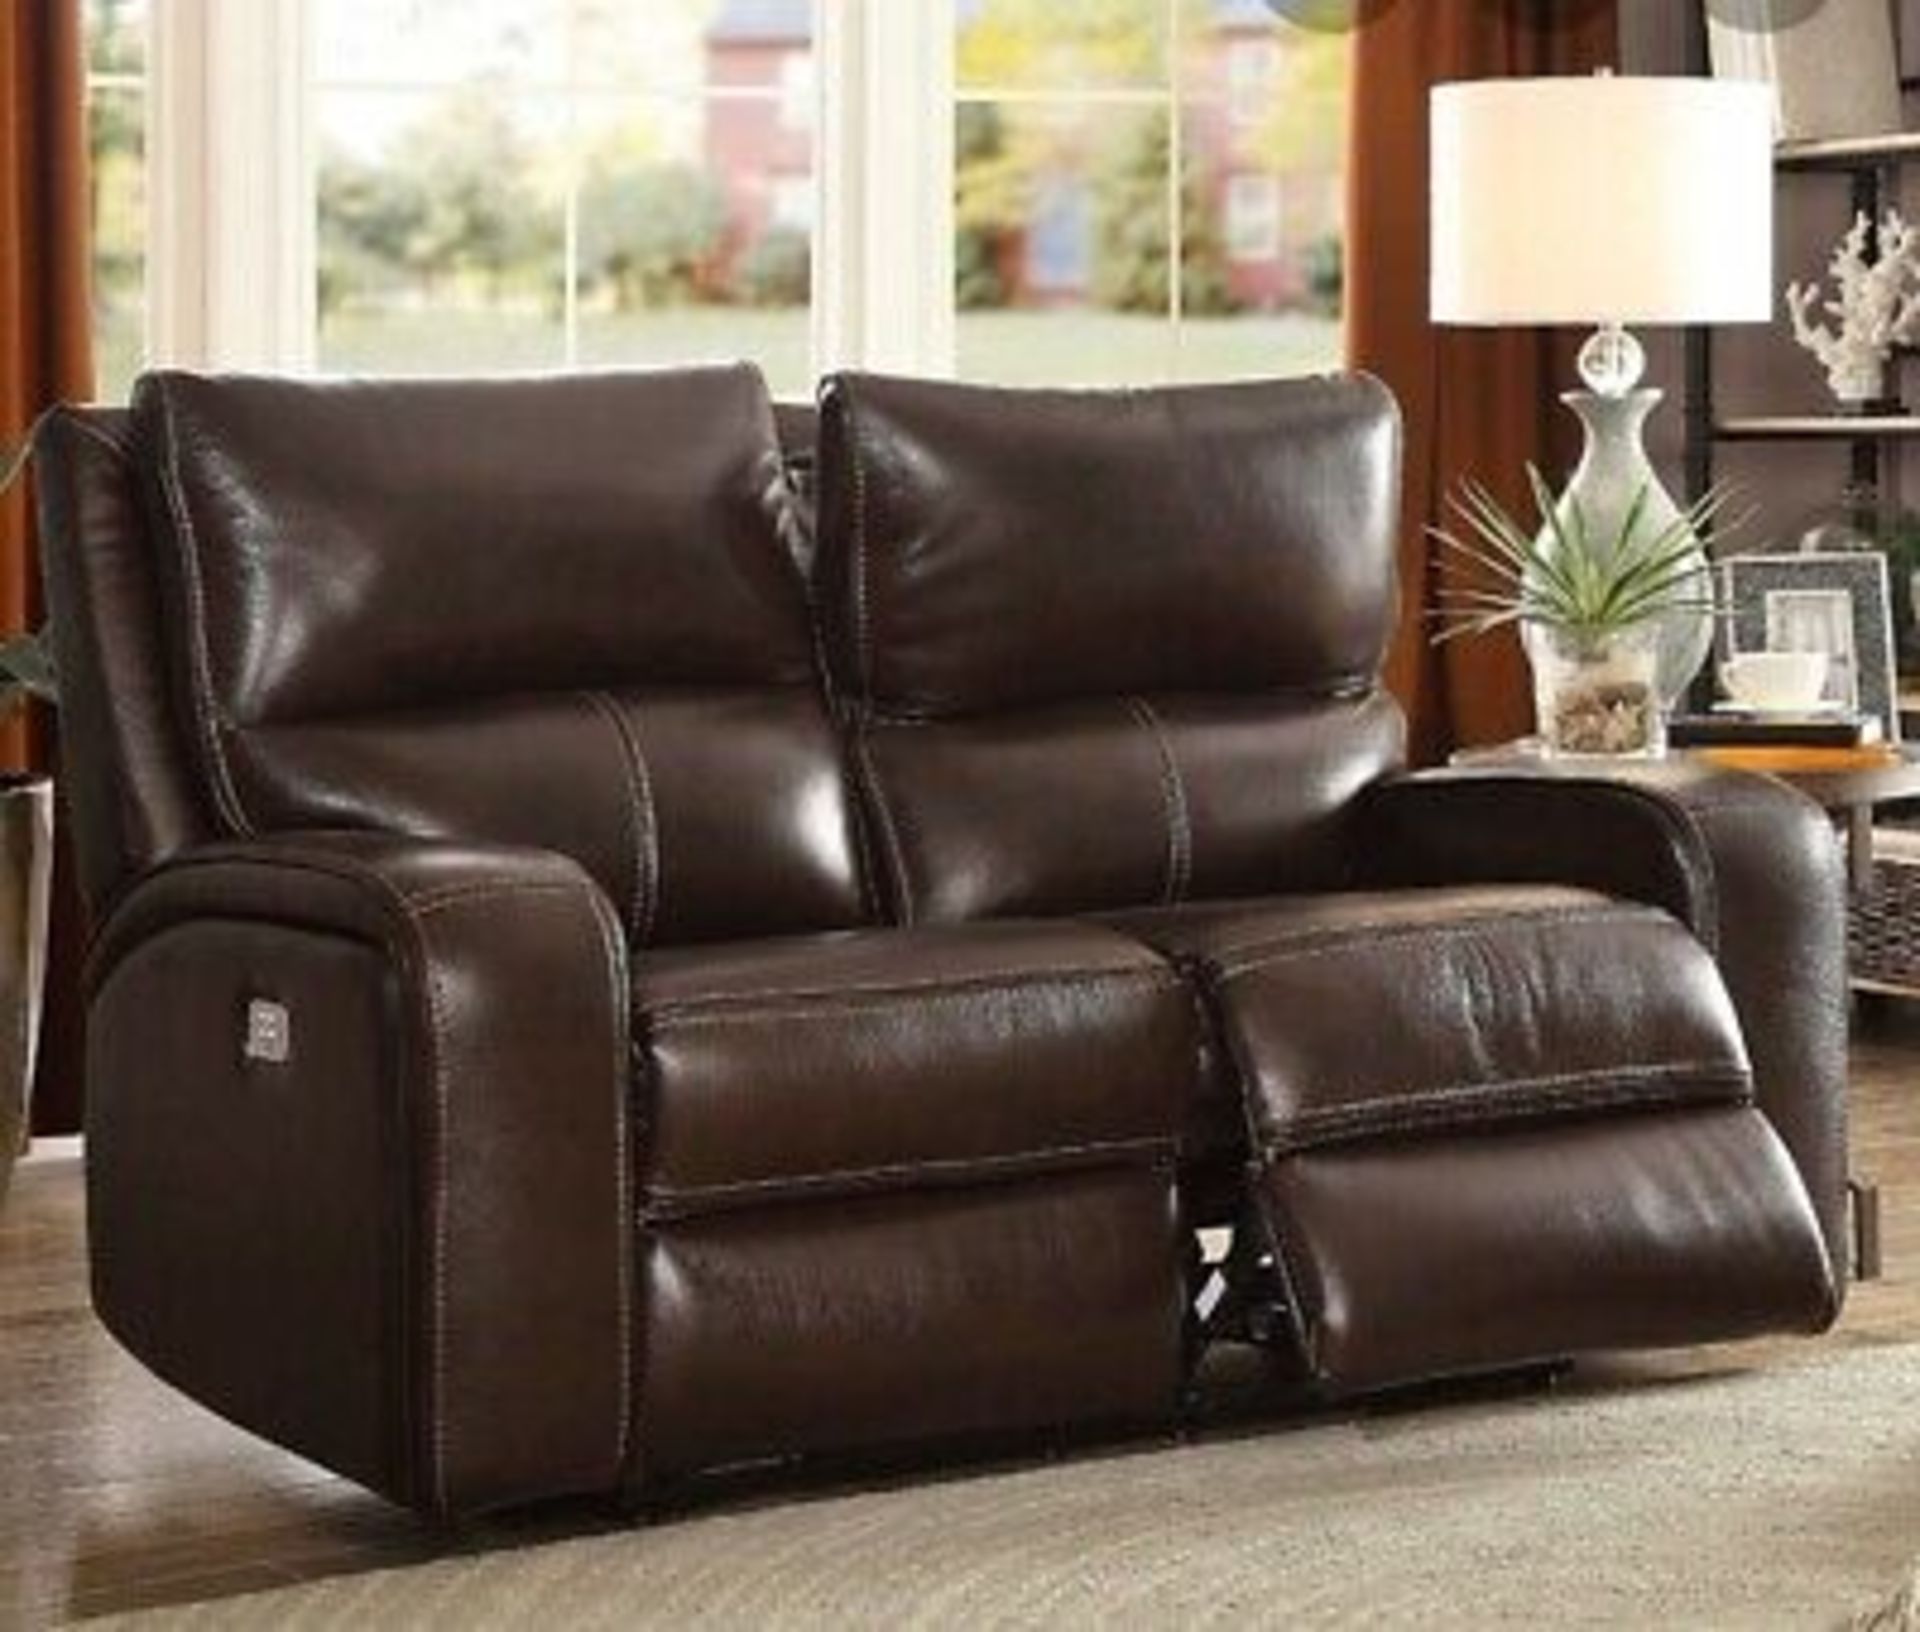 1 ZACH BROWN 2 SEATER LEATHER POWER RECLINER WITH USB PORT RRP Â£899 (GENERIC IMAGE GUIDE)